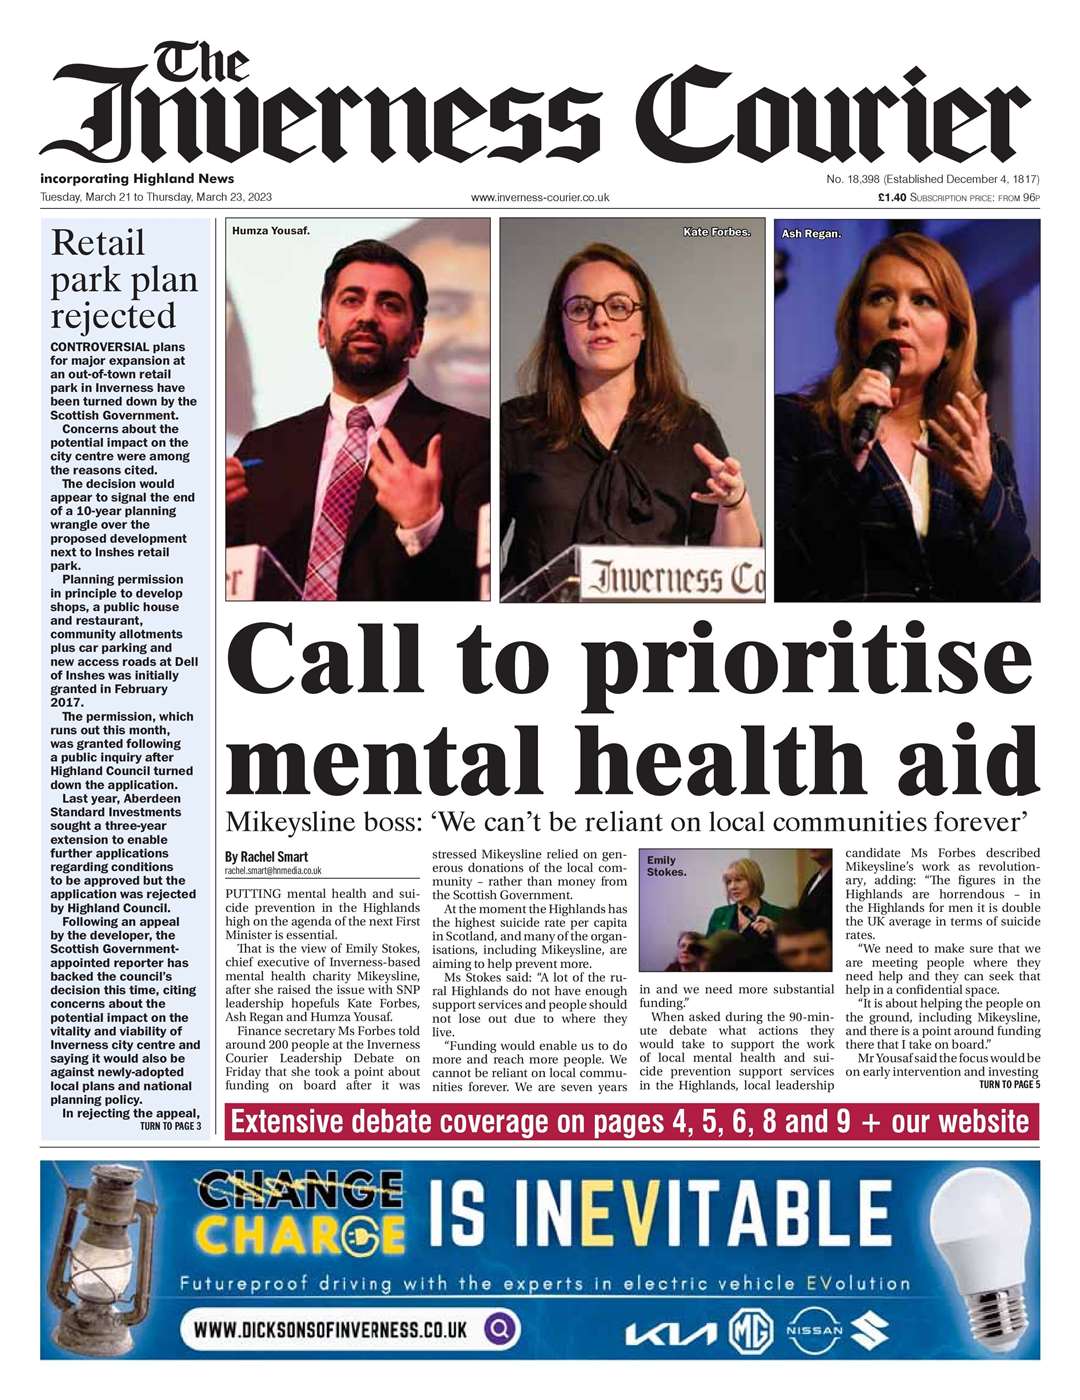 The Inverness Courier, March 21, front page.